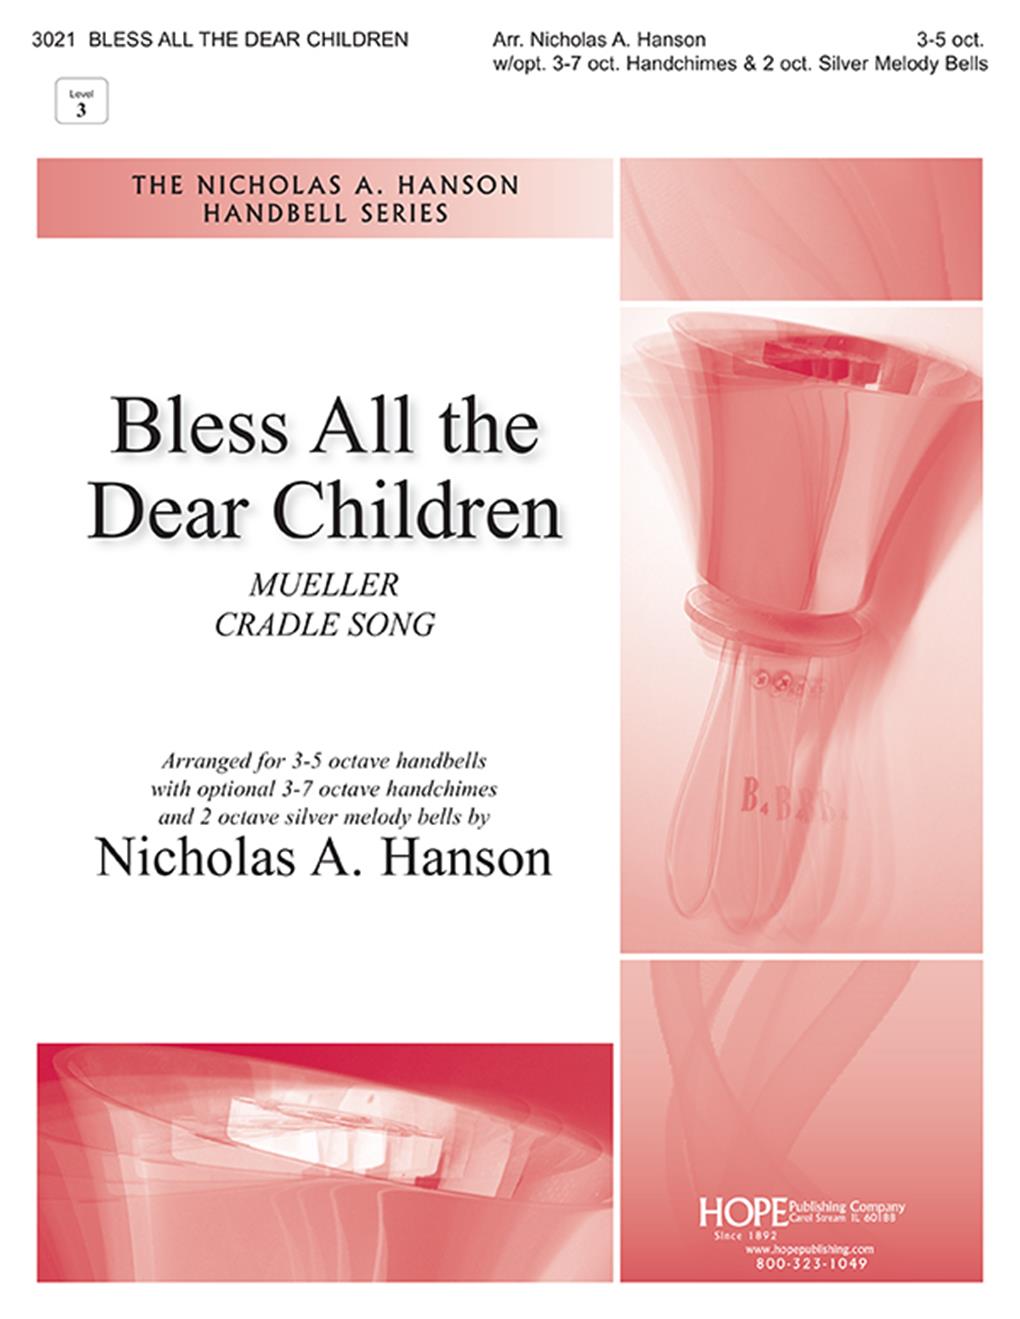 Bless All the Dear Children -3-5 oct. Cover Image